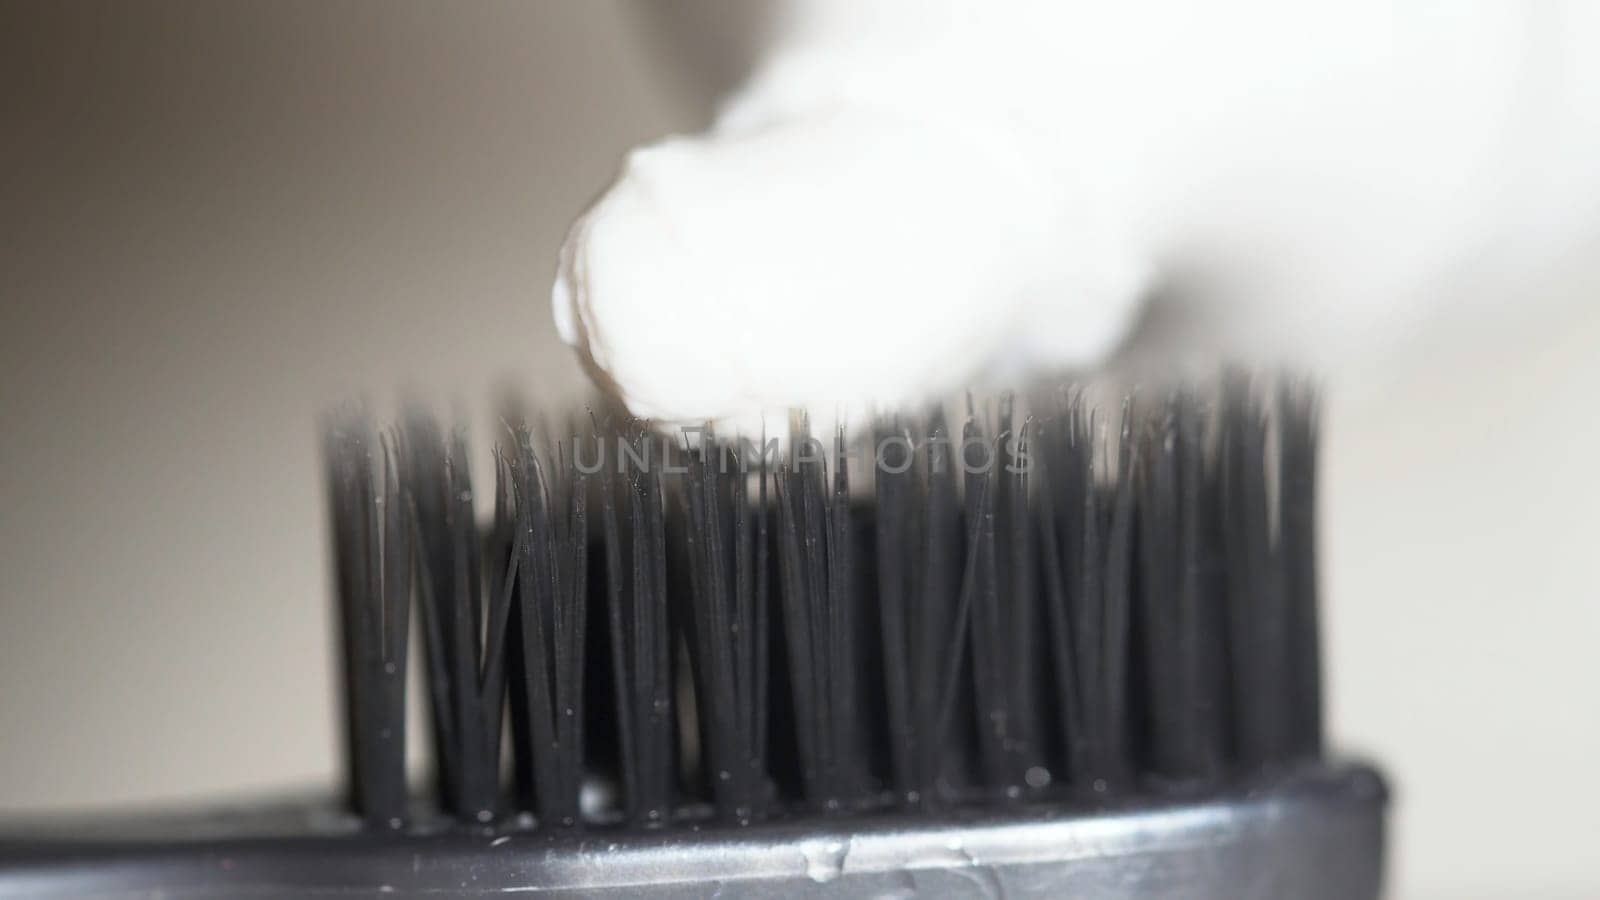 Extreme close up for a black toothbrush with white toothpaste being squeezed on it on beige background. The black bristles of the toothbrush with white toothpaste, dental care concept.